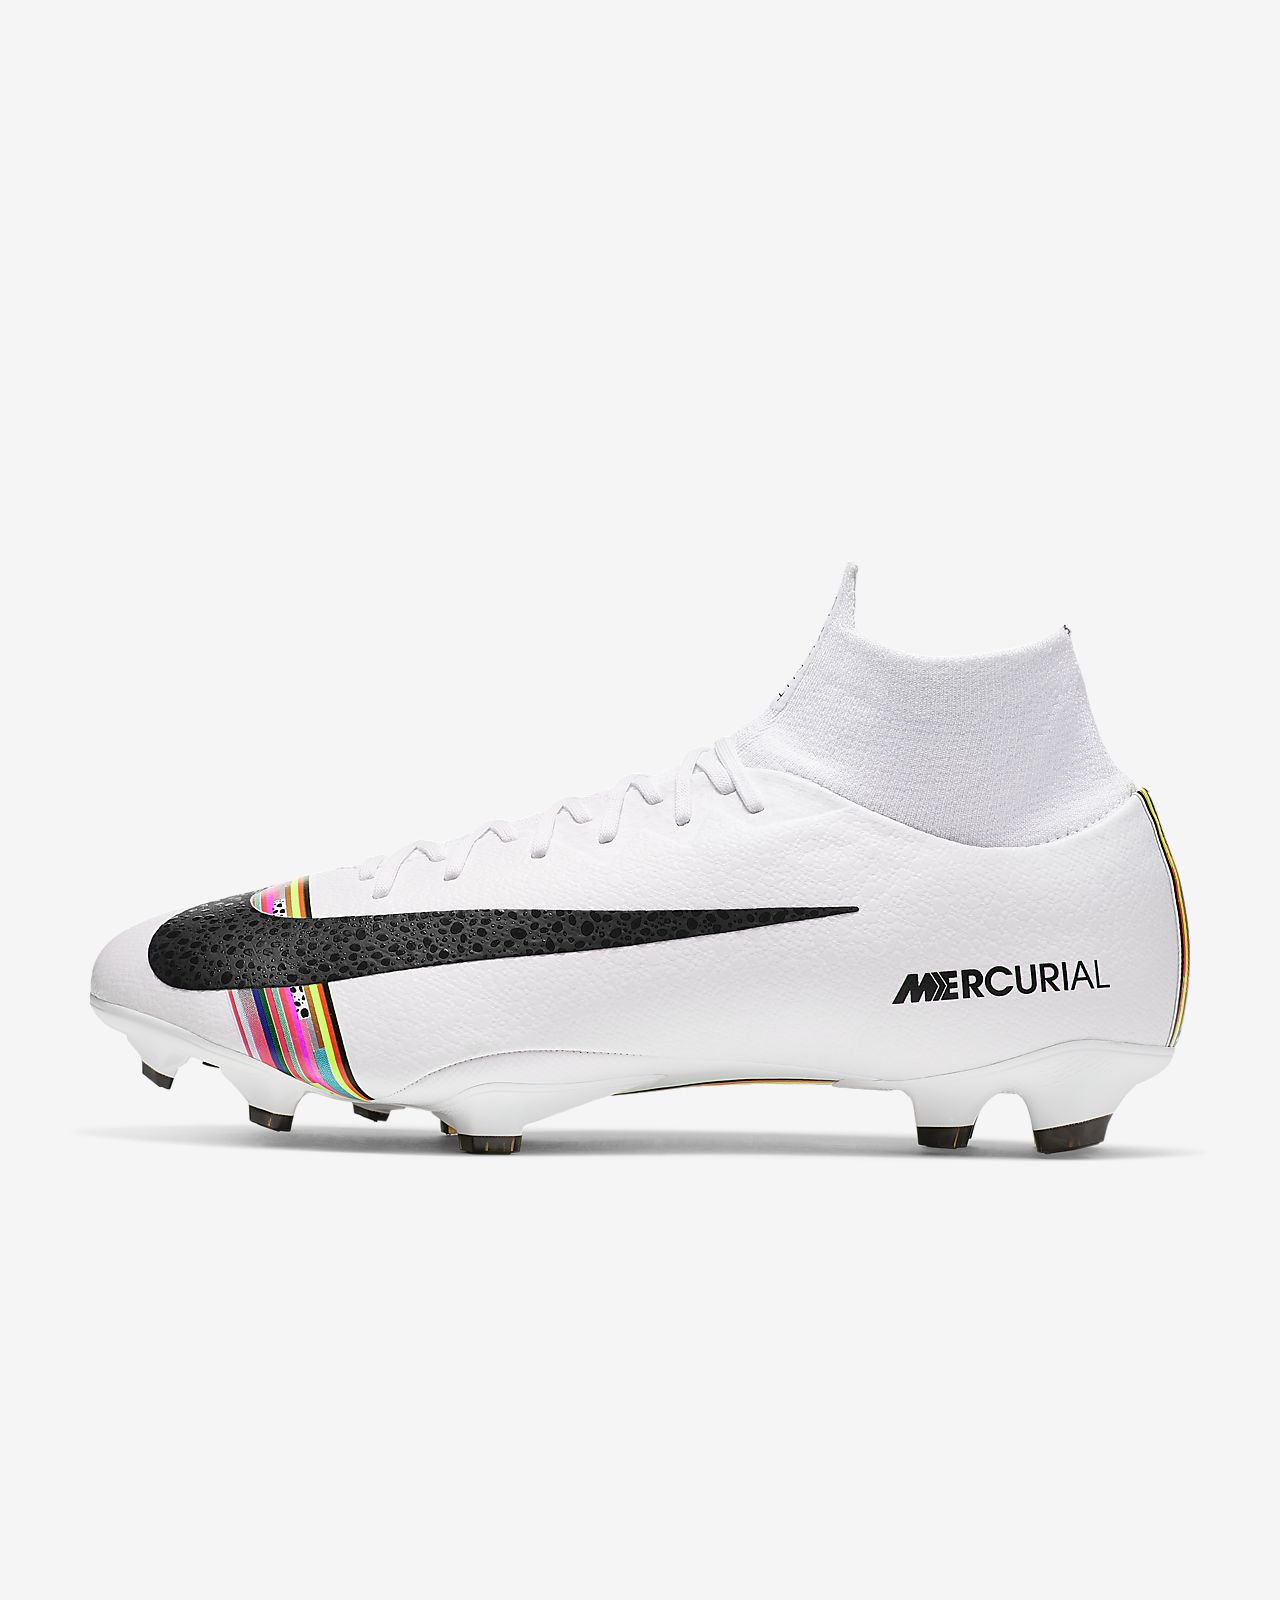 Nike Mercurial Superfly 7 Elite AG PRO Under The. YouTube